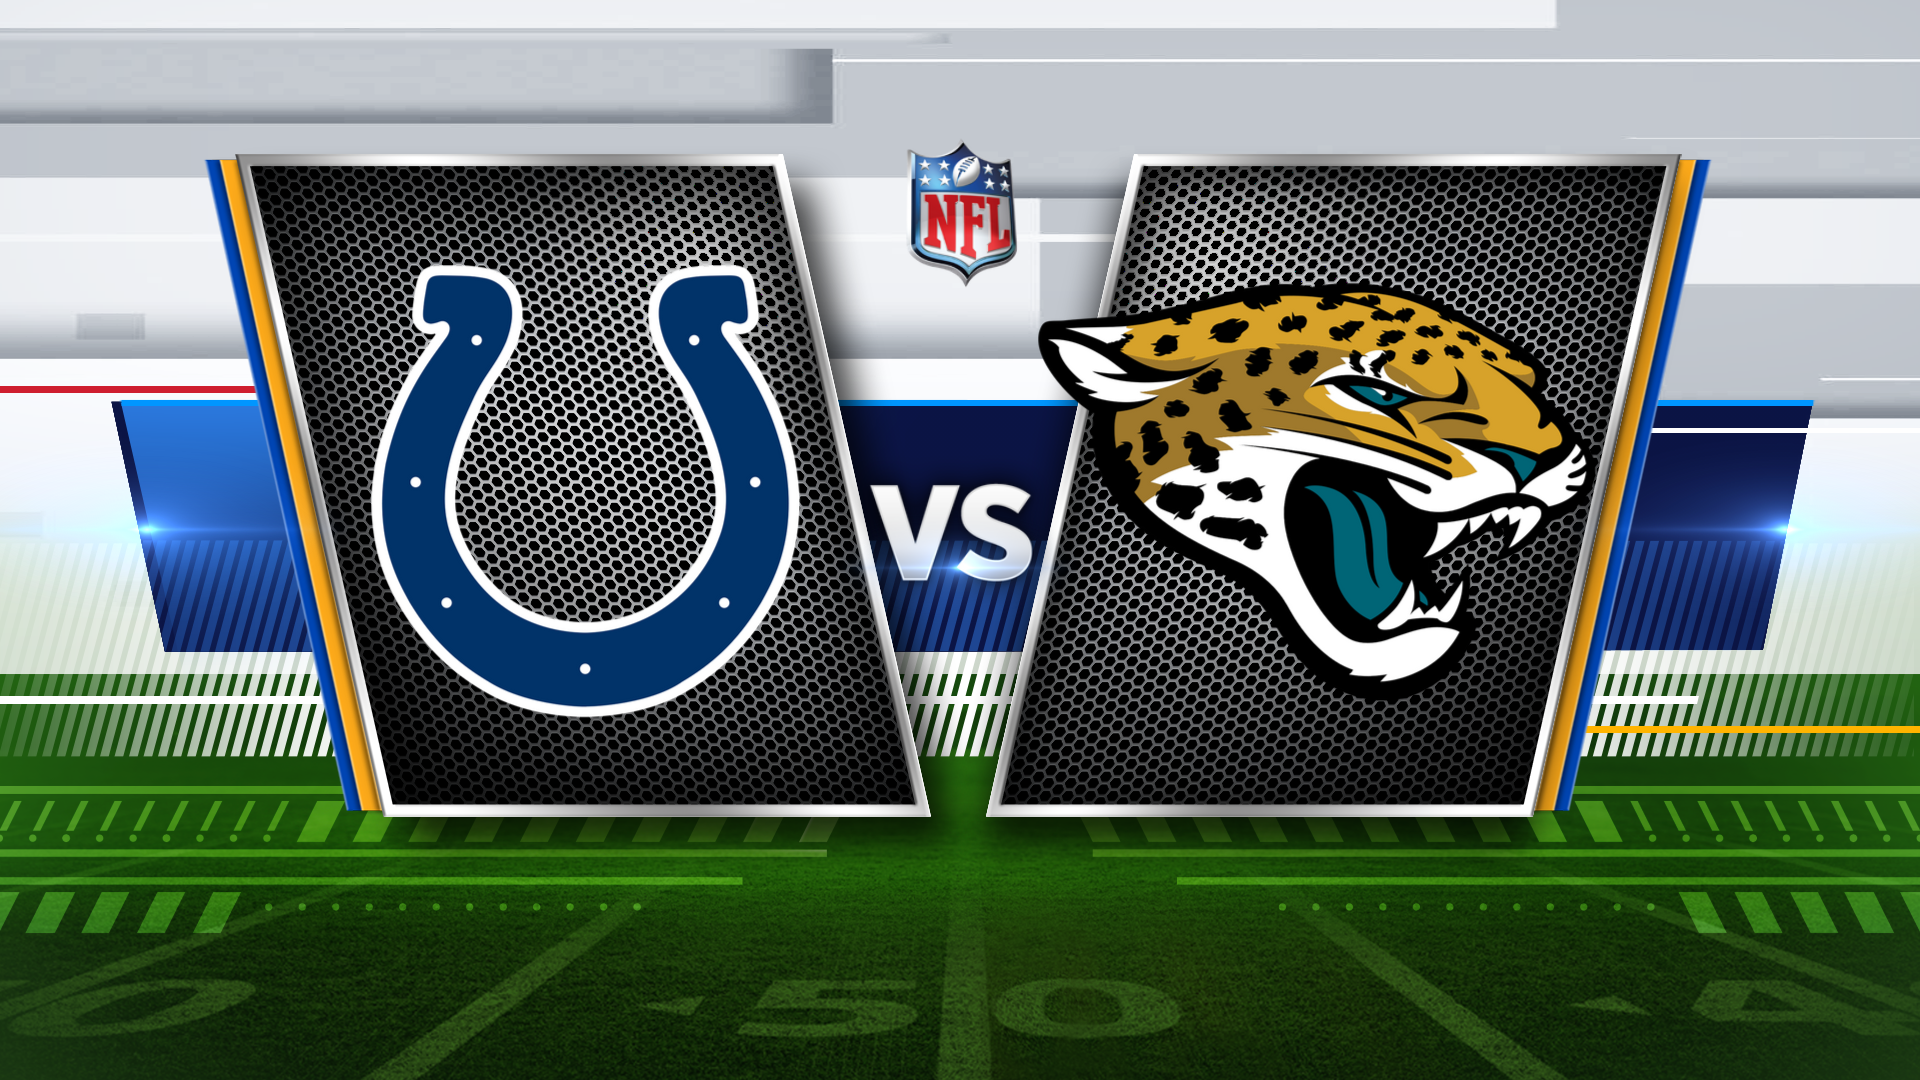 RULES: Win two tickets to see Jaguars host the Colts